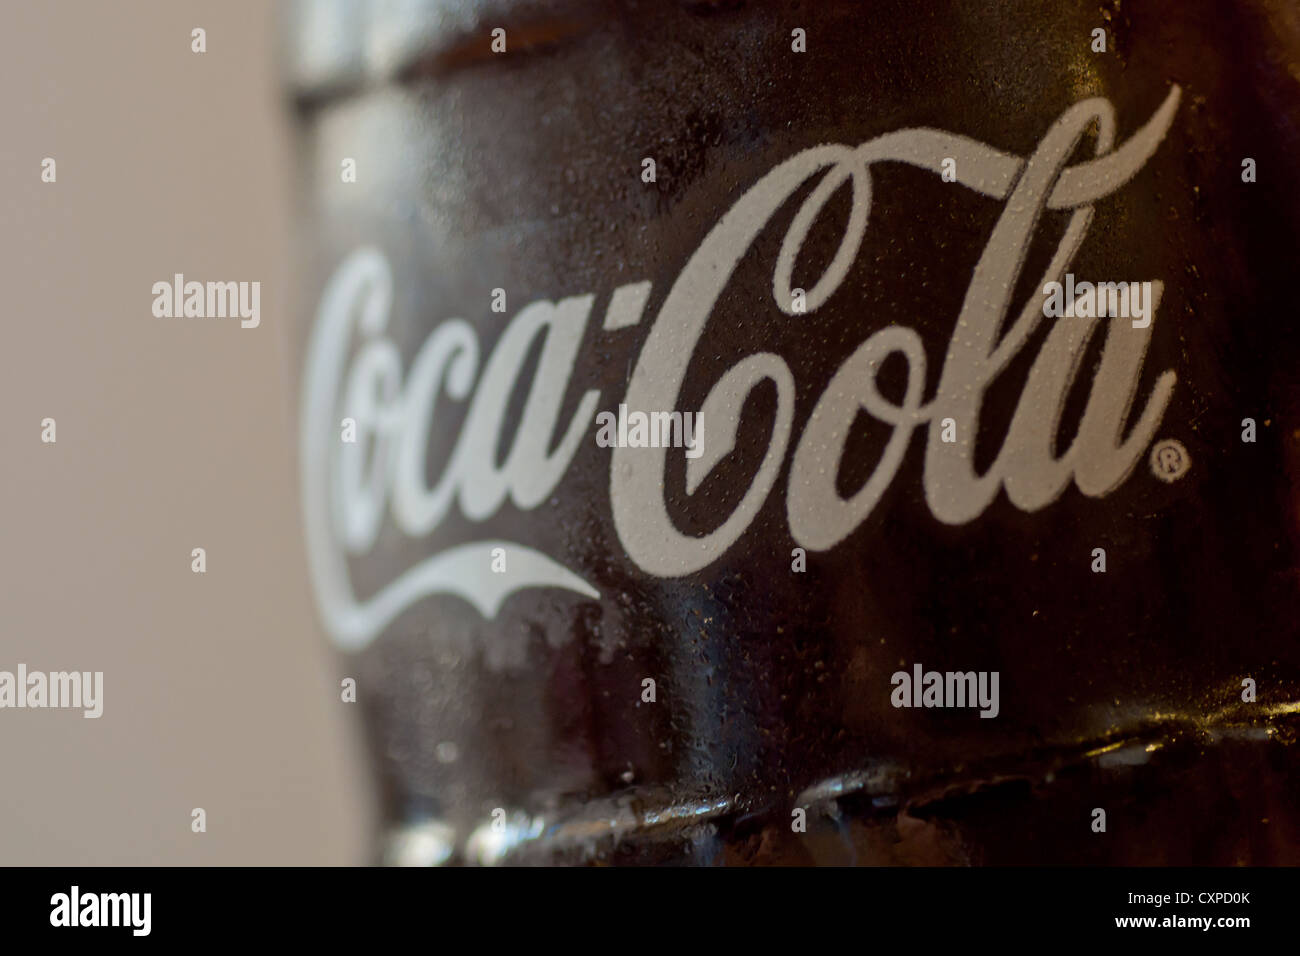 A close up of a fresh coke bottle with the Coca Cola logo. Stock Photo